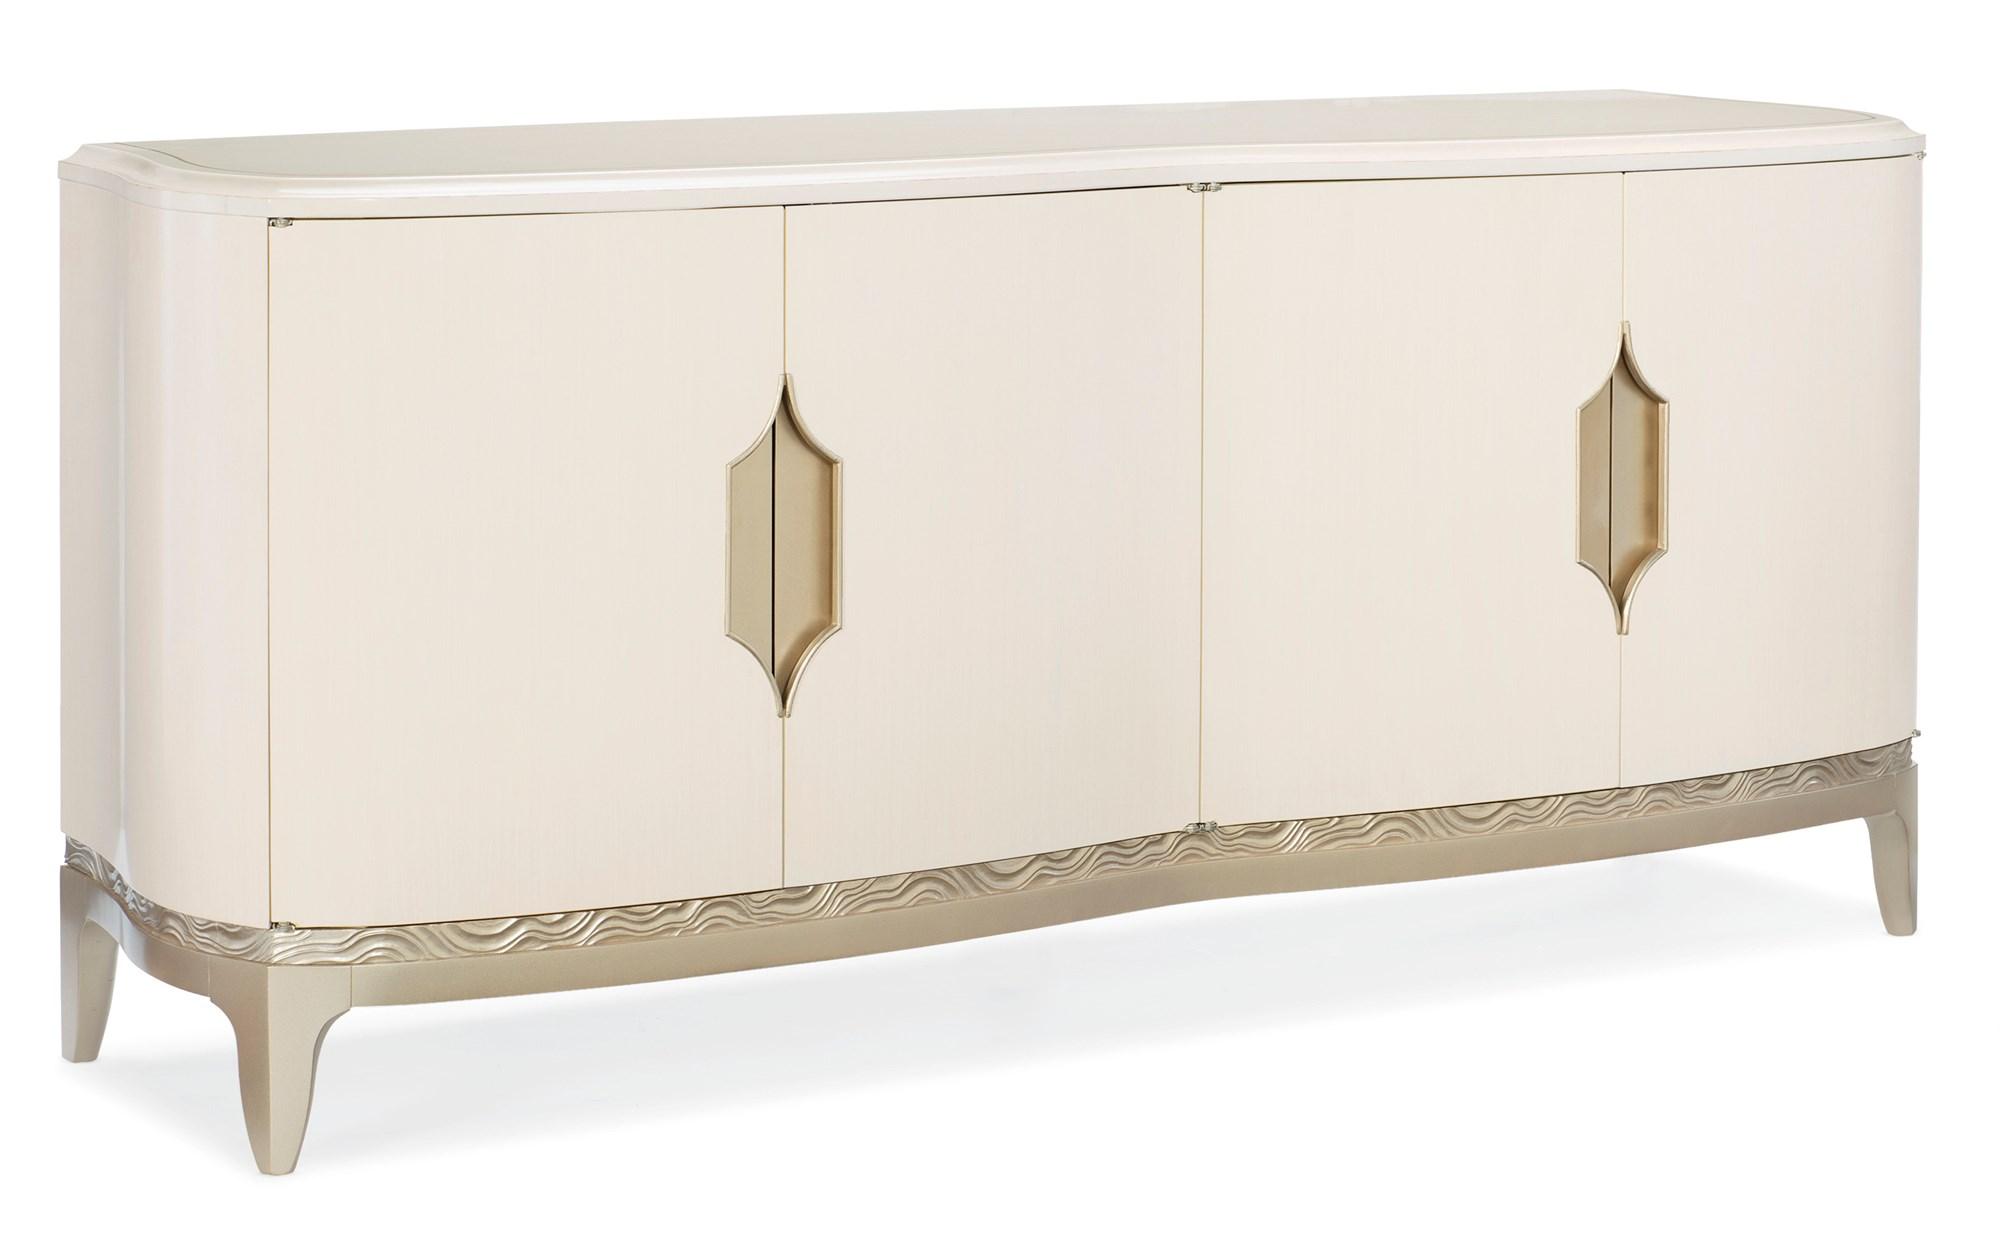 Contemporary Buffet ADELA BUFFET C012-016-211 in Off-White, Light Grey, Taupe 